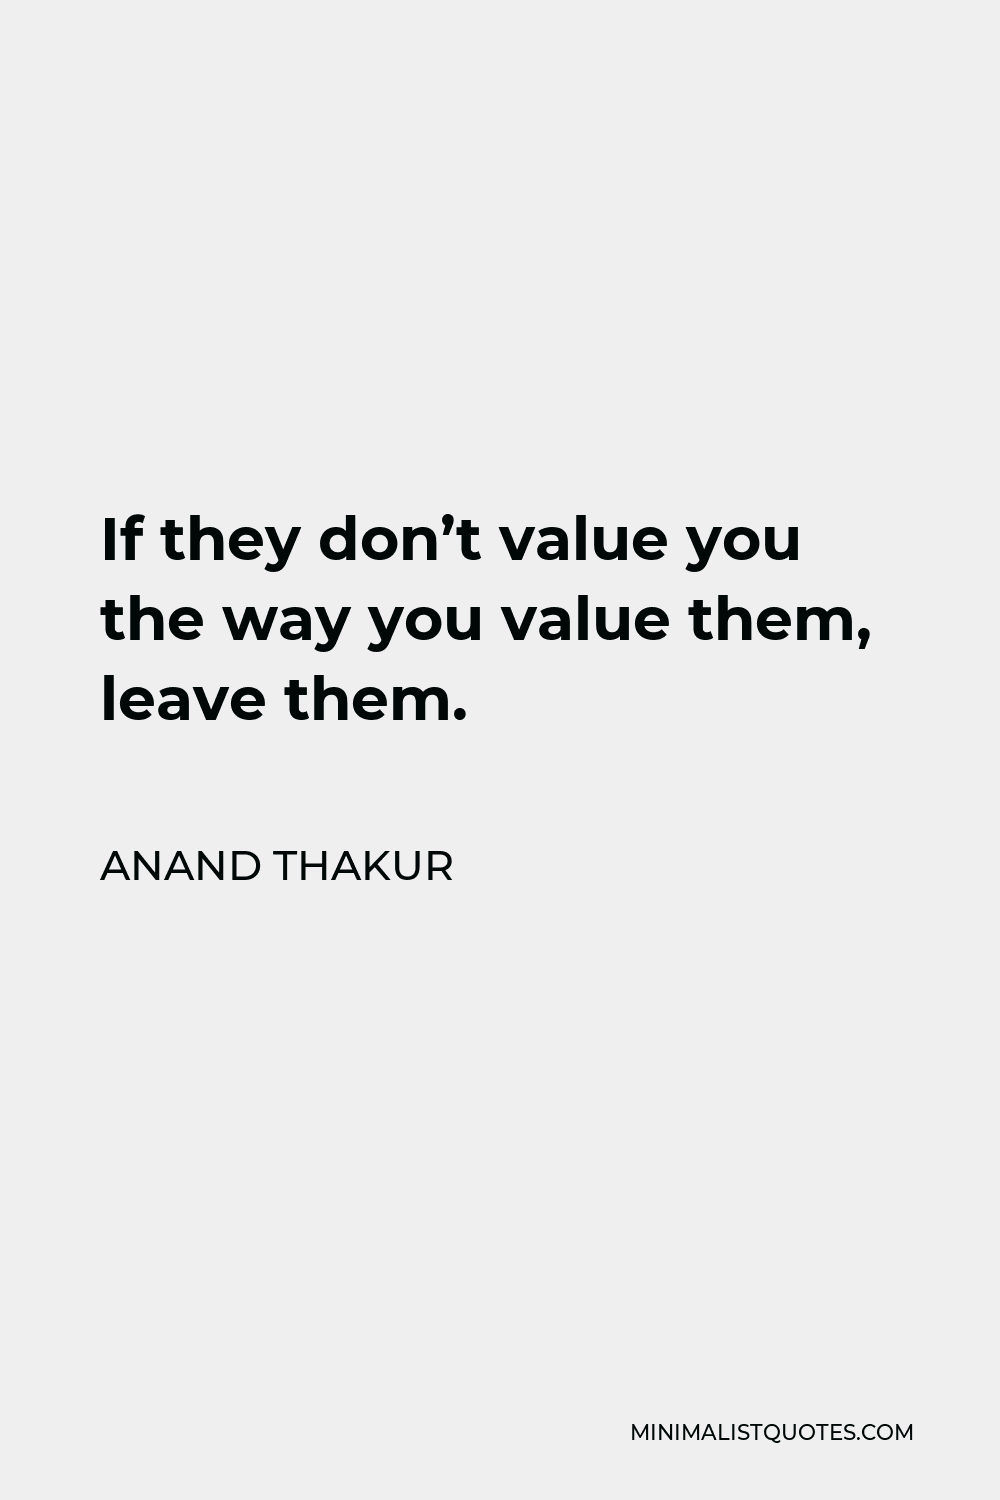 Anand Thakur Quote - If they don’t value you the way you value them, leave them.